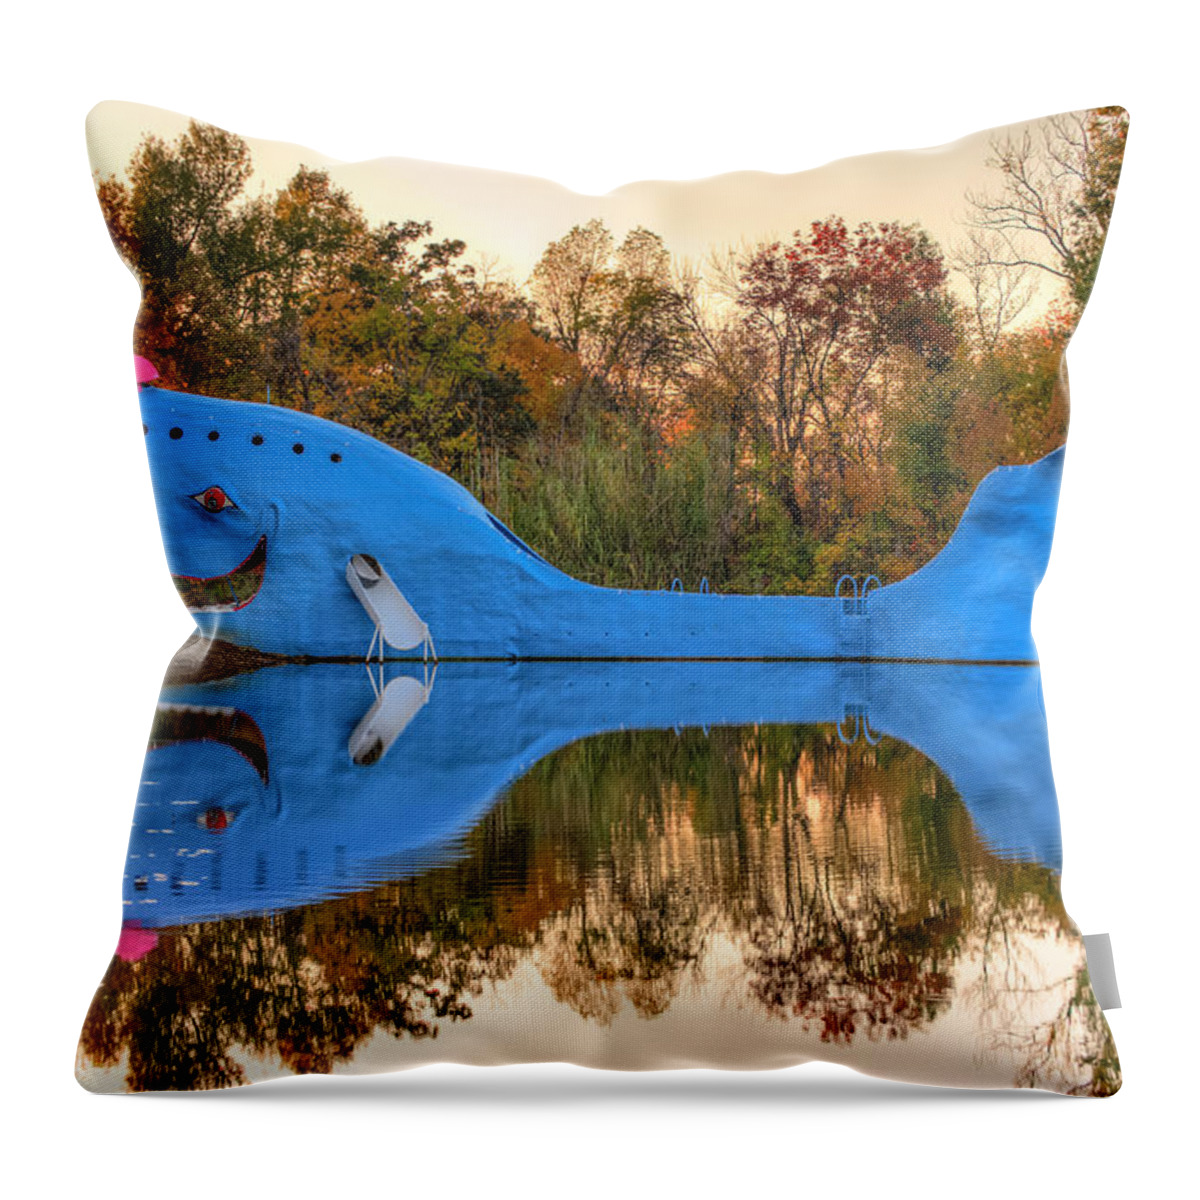 Catoosa Blue Whale Throw Pillow featuring the photograph The Route 66 Blue Whale - Catoosa Oklahoma by Gregory Ballos